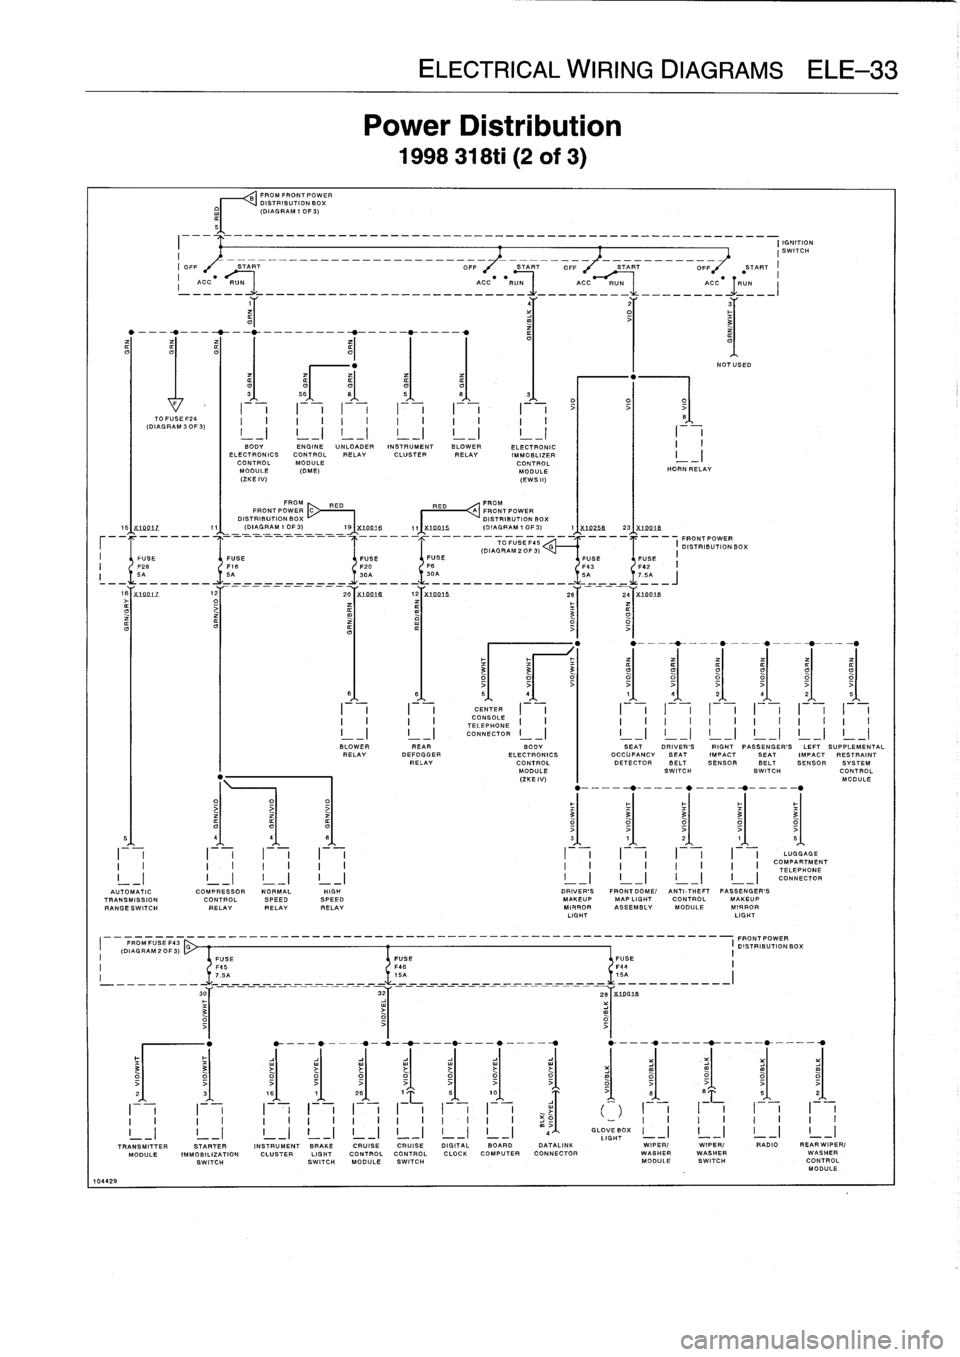 BMW M3 1993 E36 Owners Manual 
10442
9

II
OFF

TO
FUSE
F14
(DIAGRAM
3
OF
3)

----------------------------------------------------
I
IGNITION
I
SWITCH
START
-----------------
OFF
--
START

	

OFF

	

START
----
OFF

	

START
I

a
